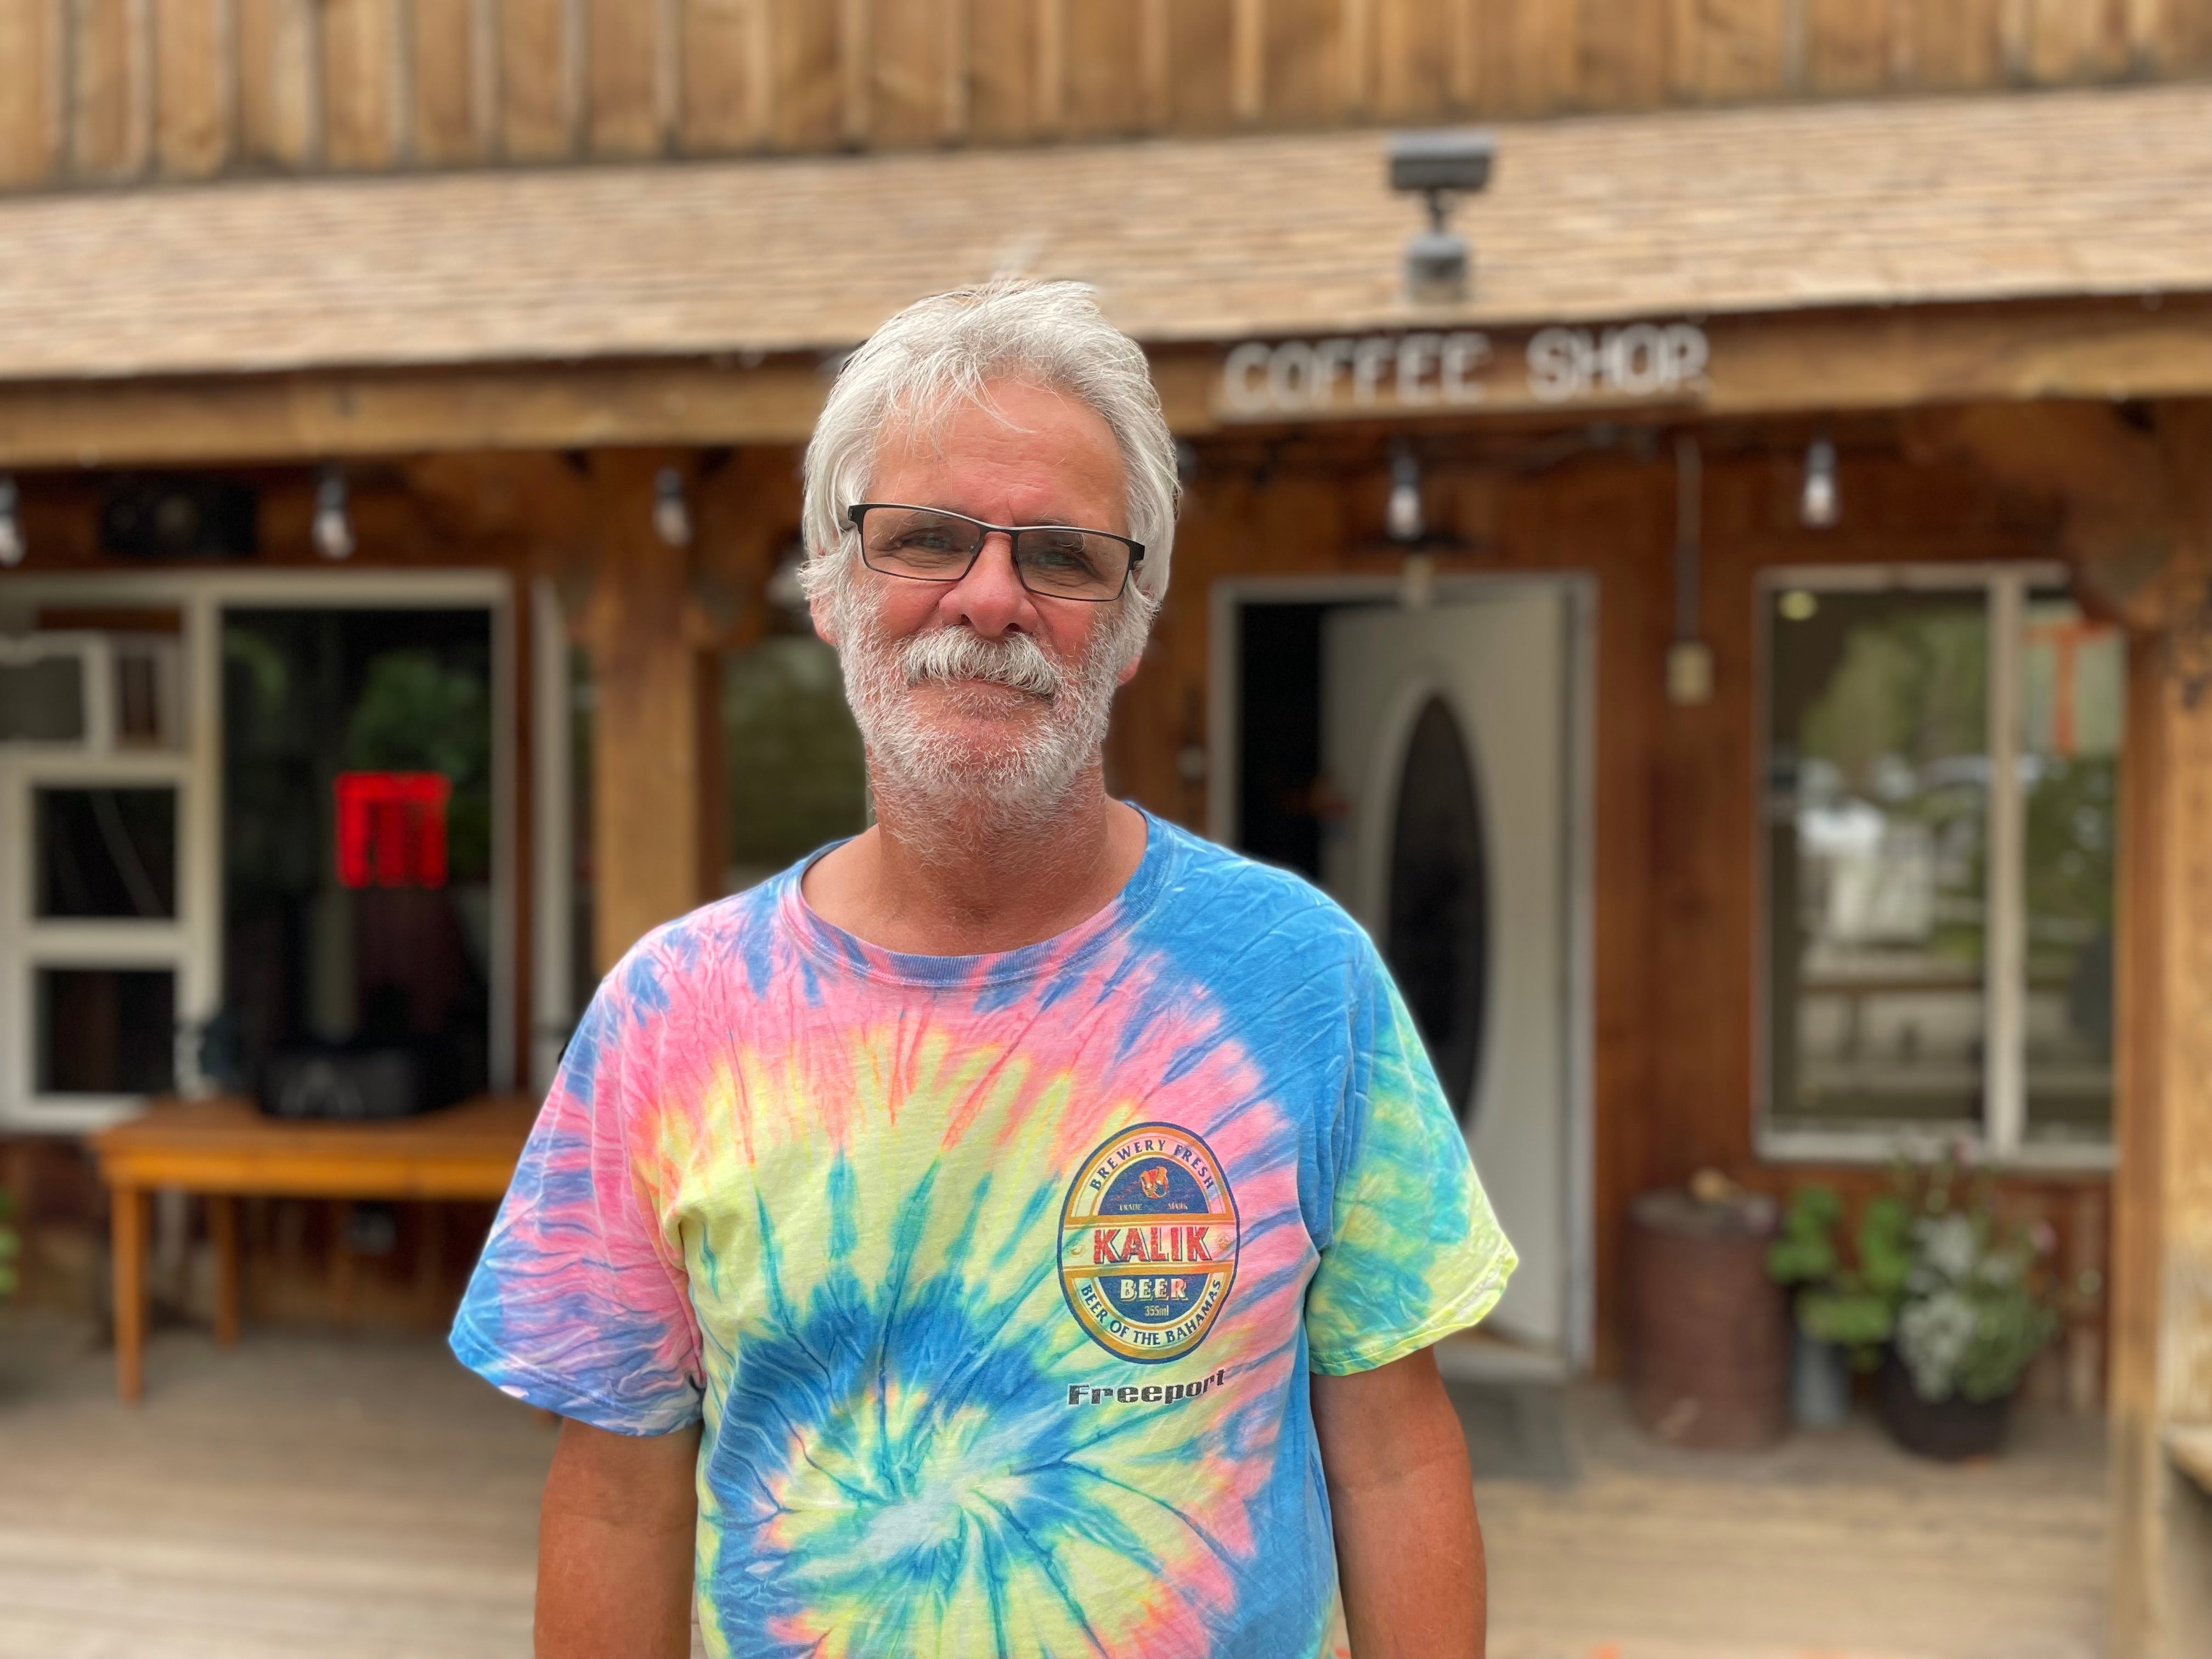 The Packing House cafe owner Steve Rice, who has fed first responders nearly round-the-clock as British Columbia is wracked by wildfires.